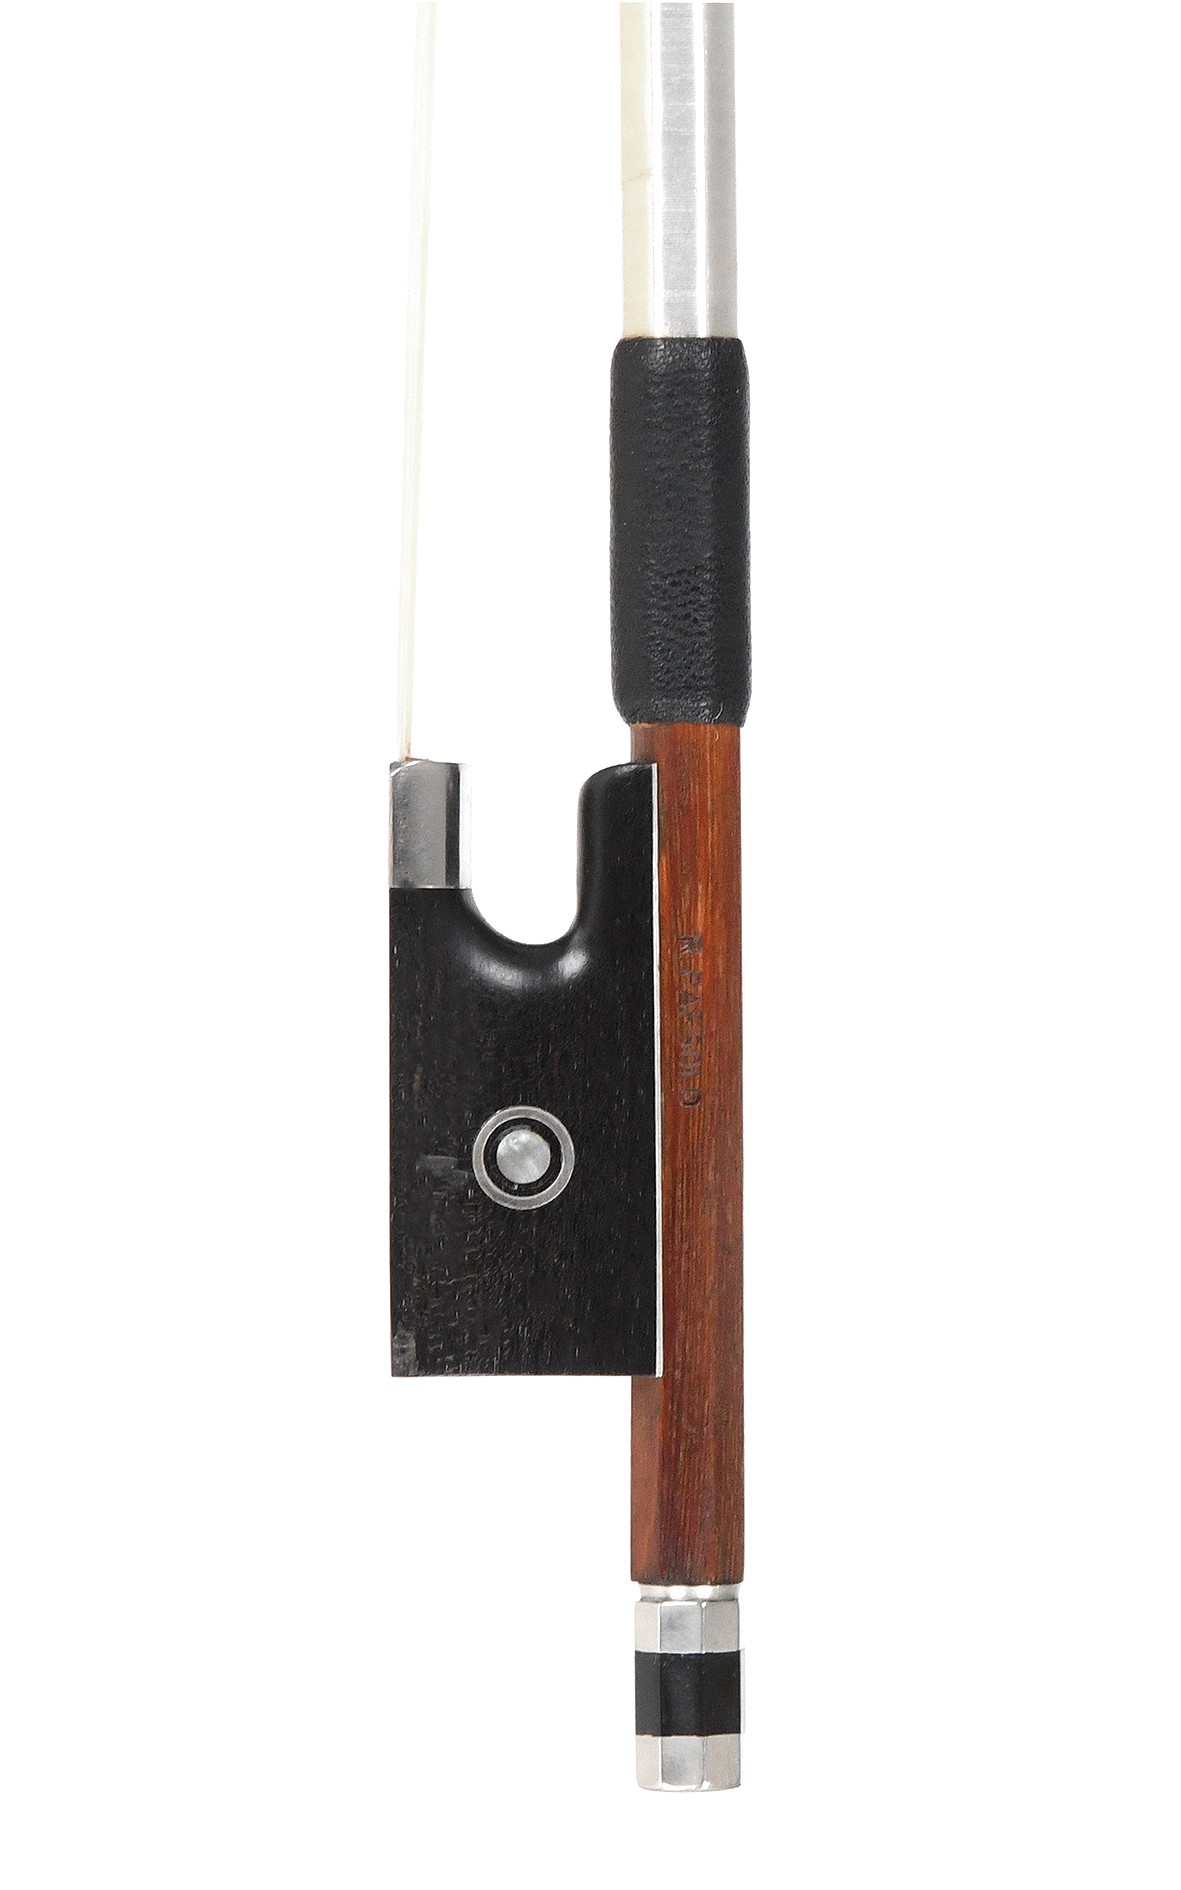 Very good violin bow, R. Paesold - 1990s